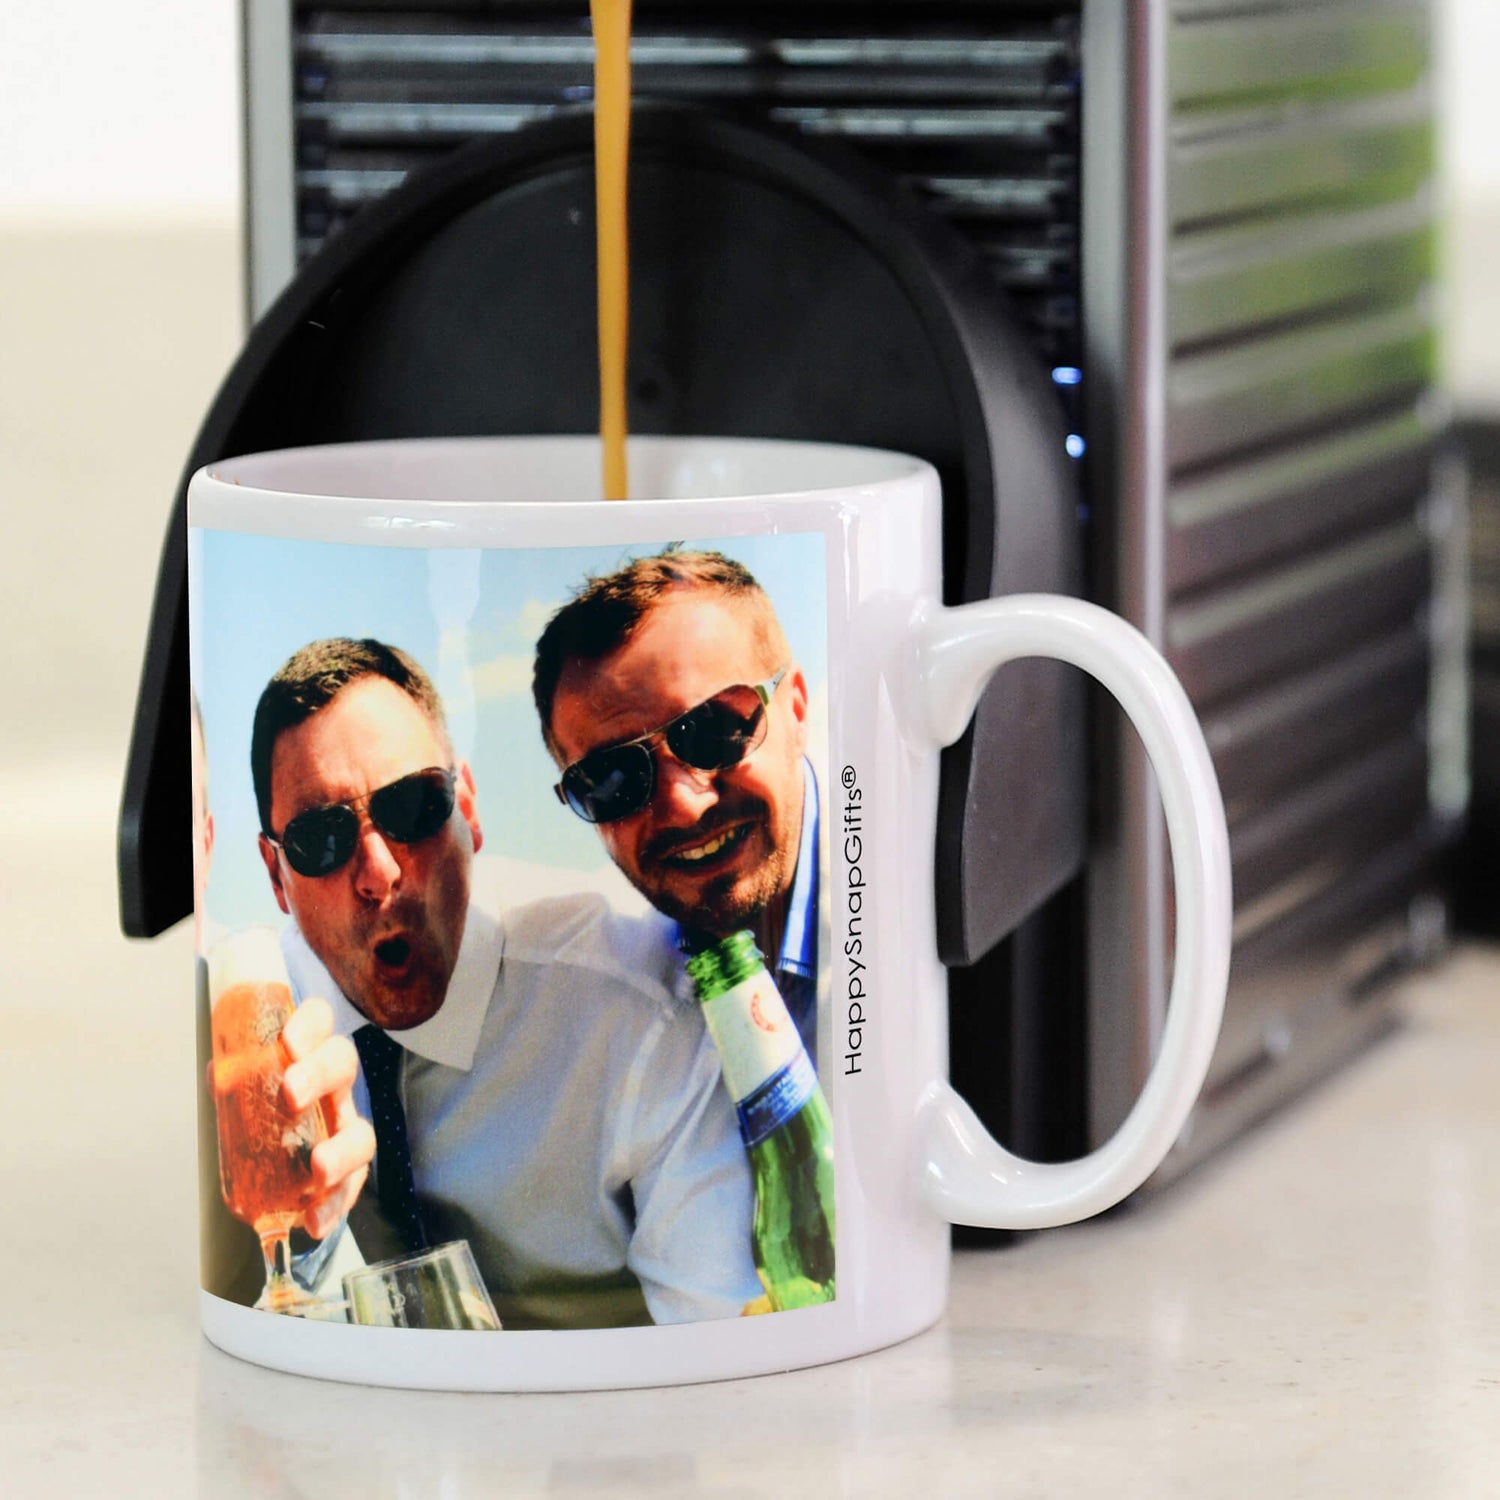 Personalised Mugs: Tailored Solutions for Business and Personal Expressions